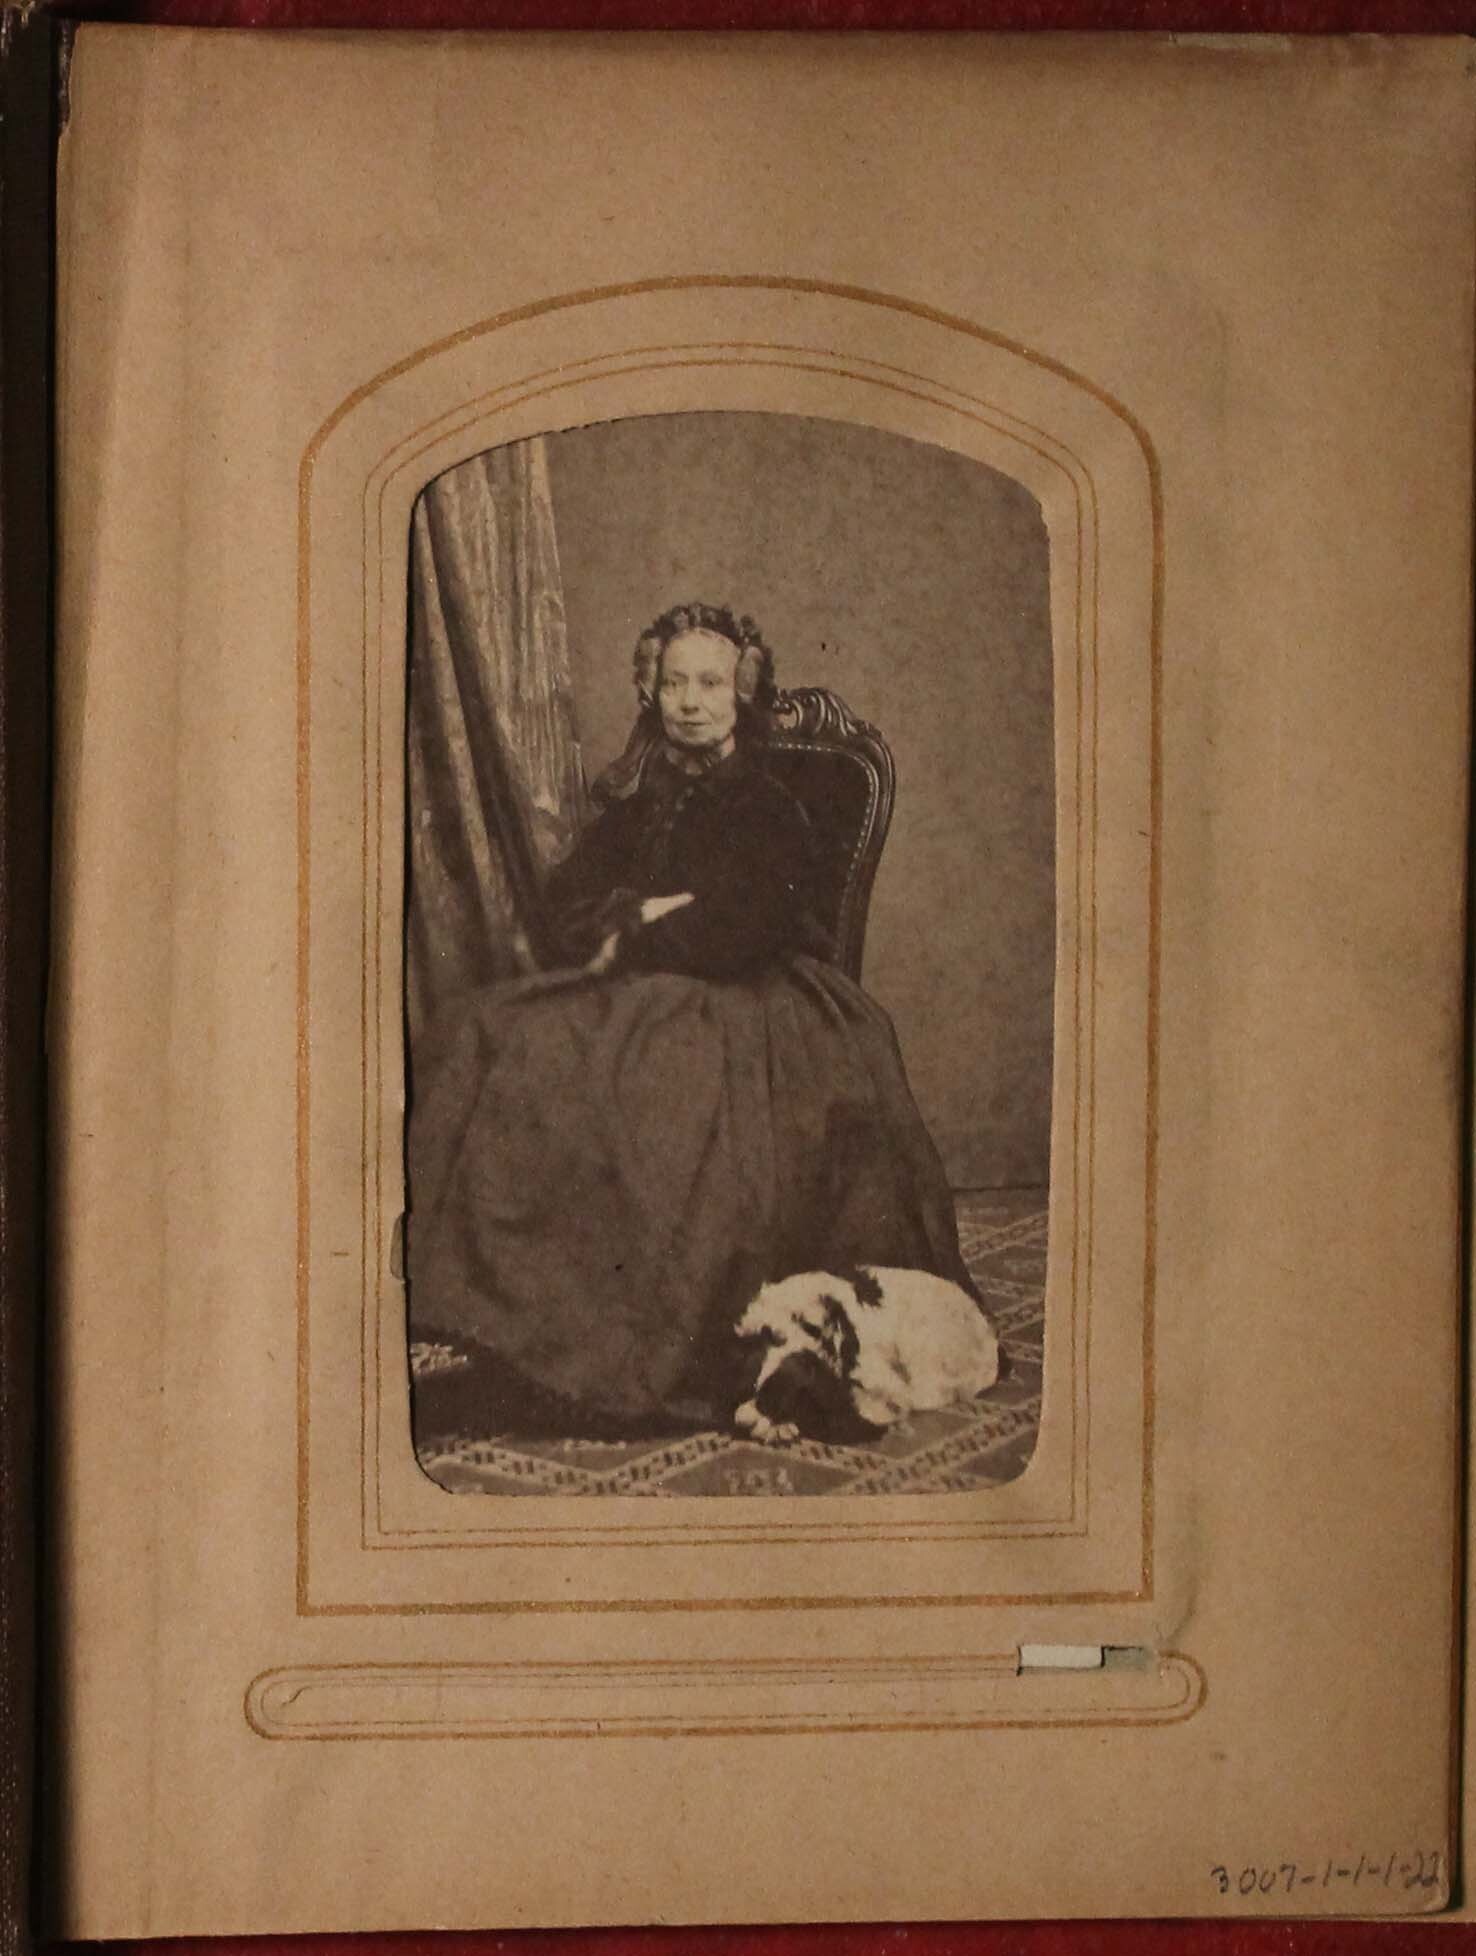 Black and white photograph of older woman sitting posed with small dog curled at her feet.